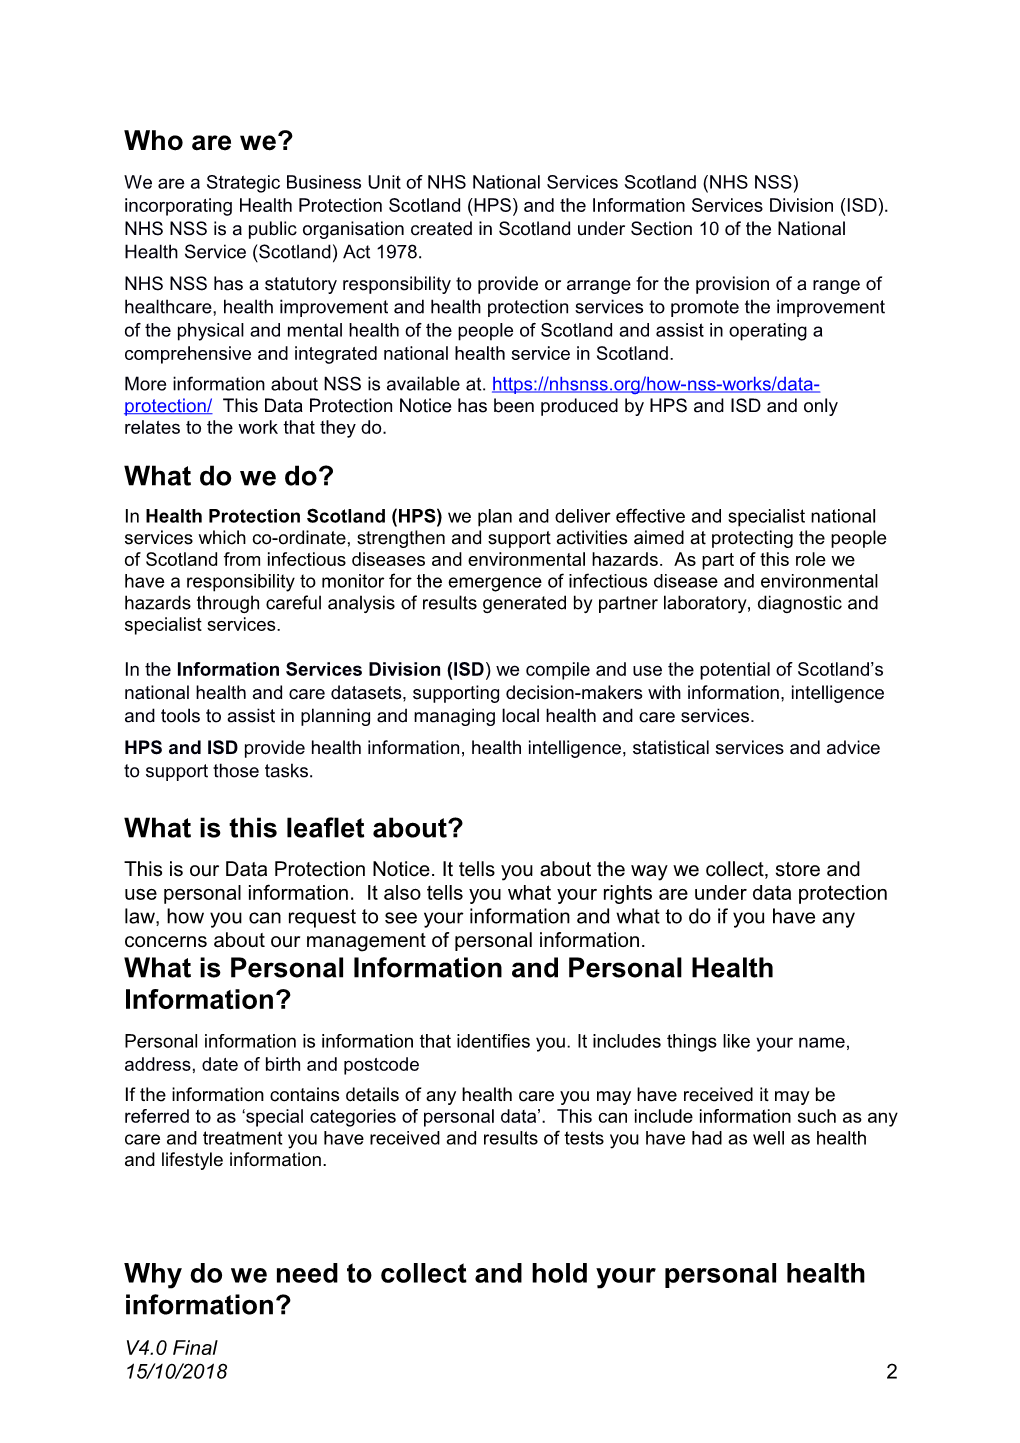 Health Protection Scotland and the Information Services Division of NHS National Services